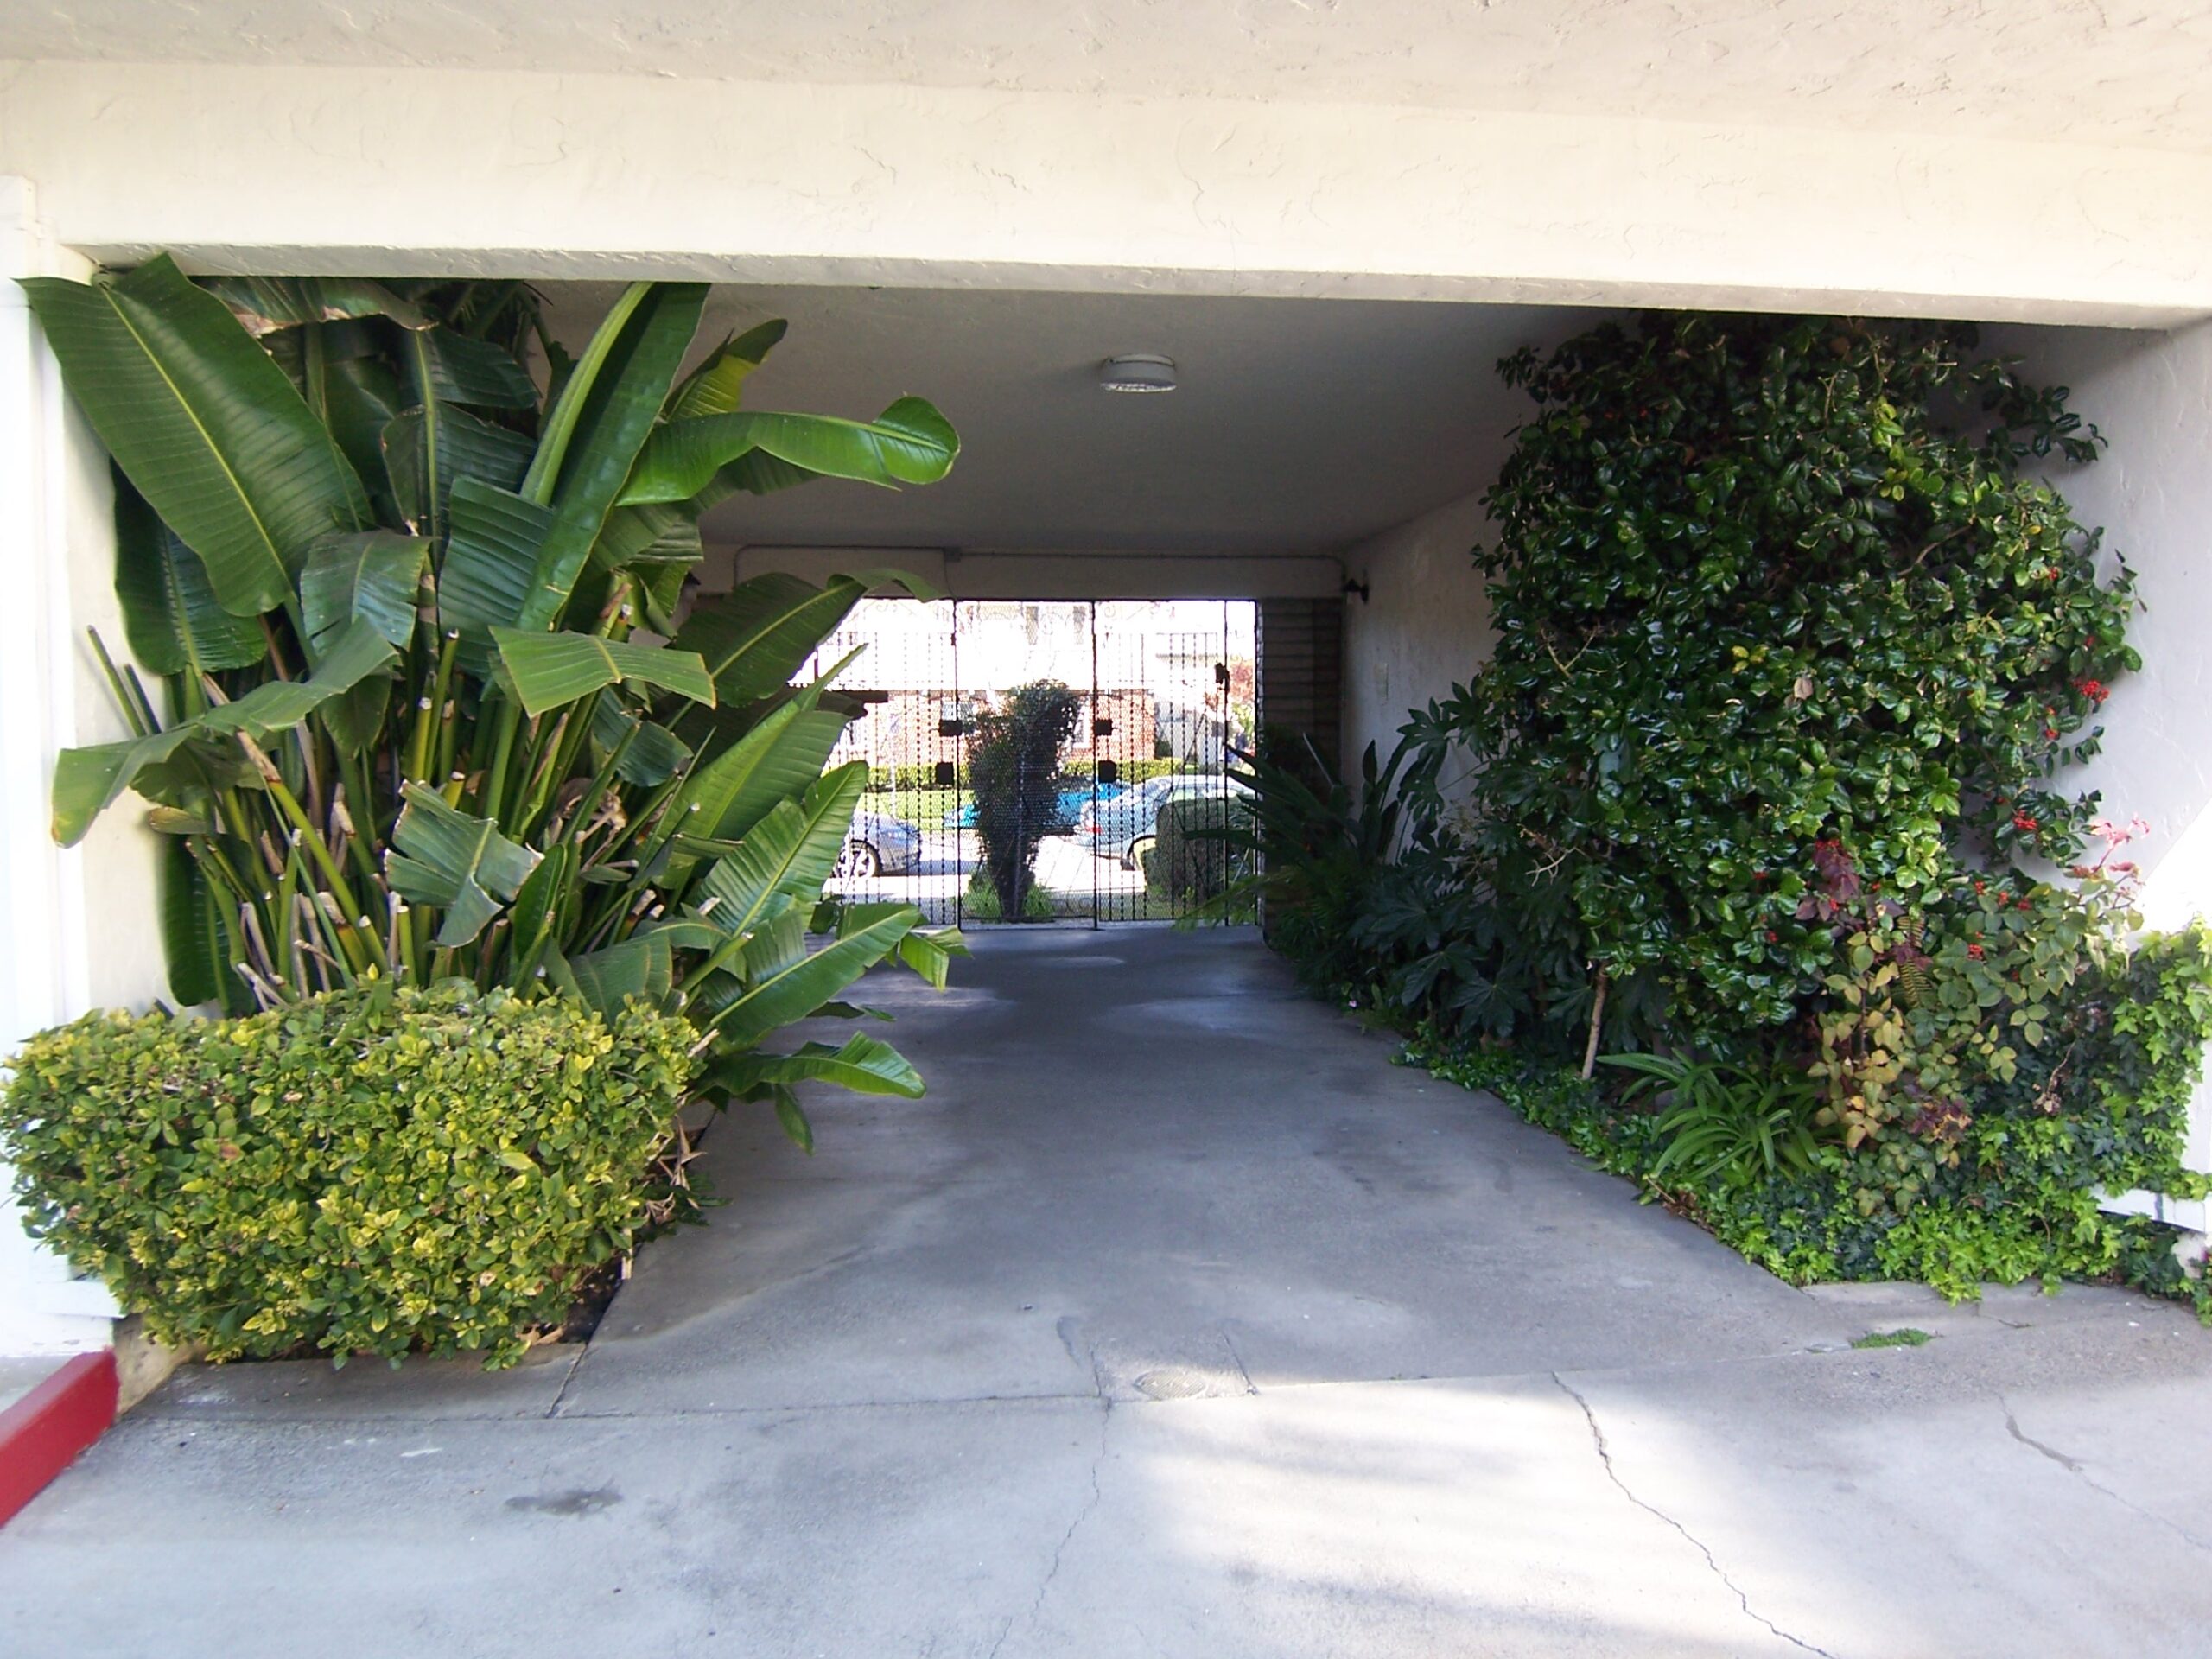 A walkway with plants and bushes in the middle of it.